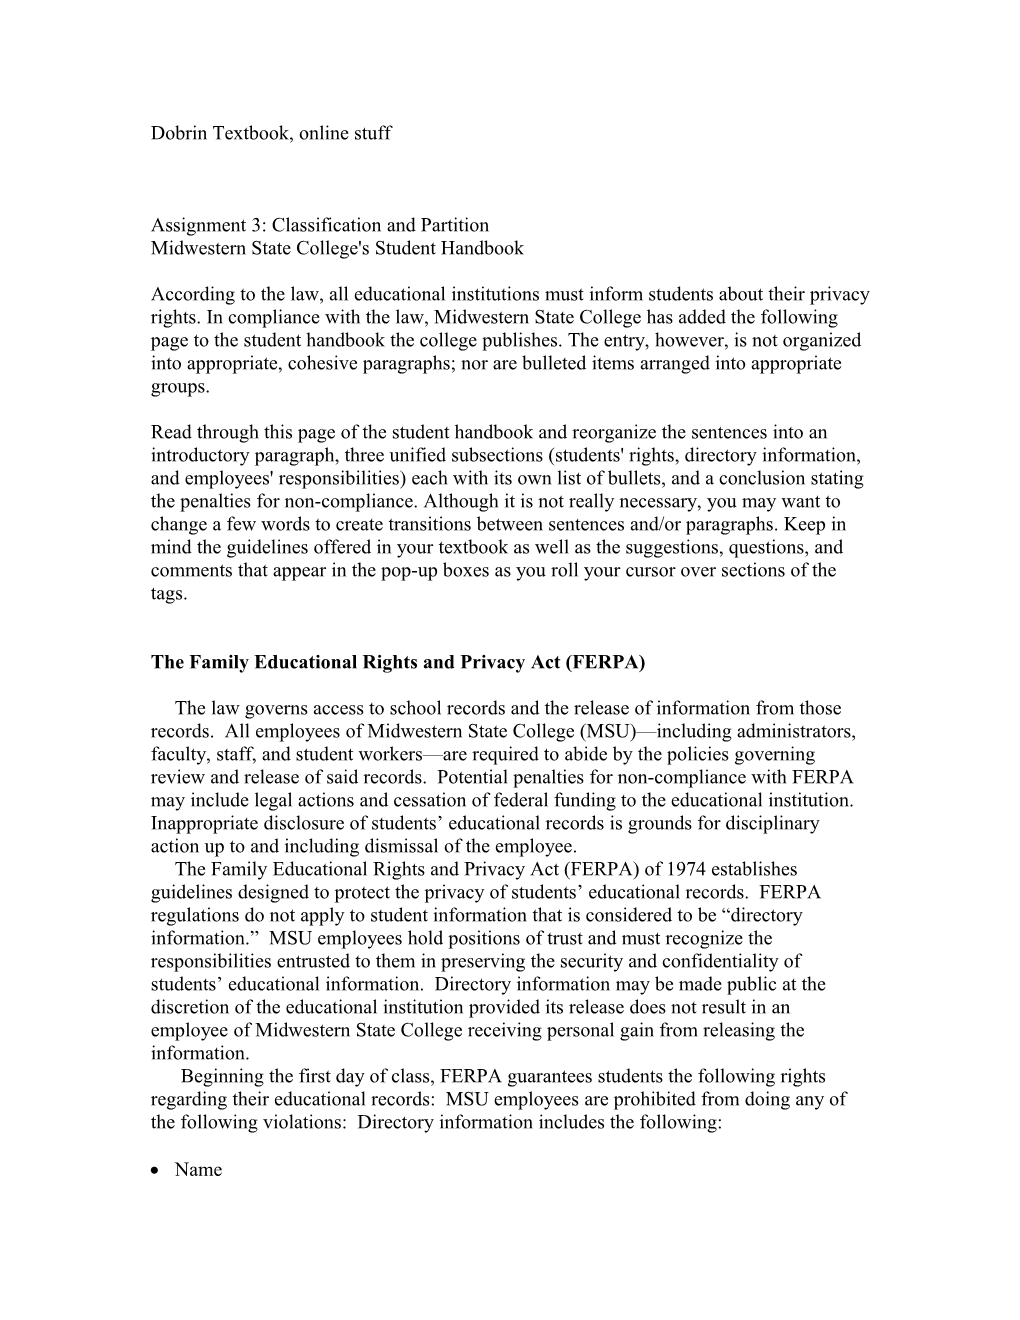 The Family Educational Rights and Privacy Act (FERPA)